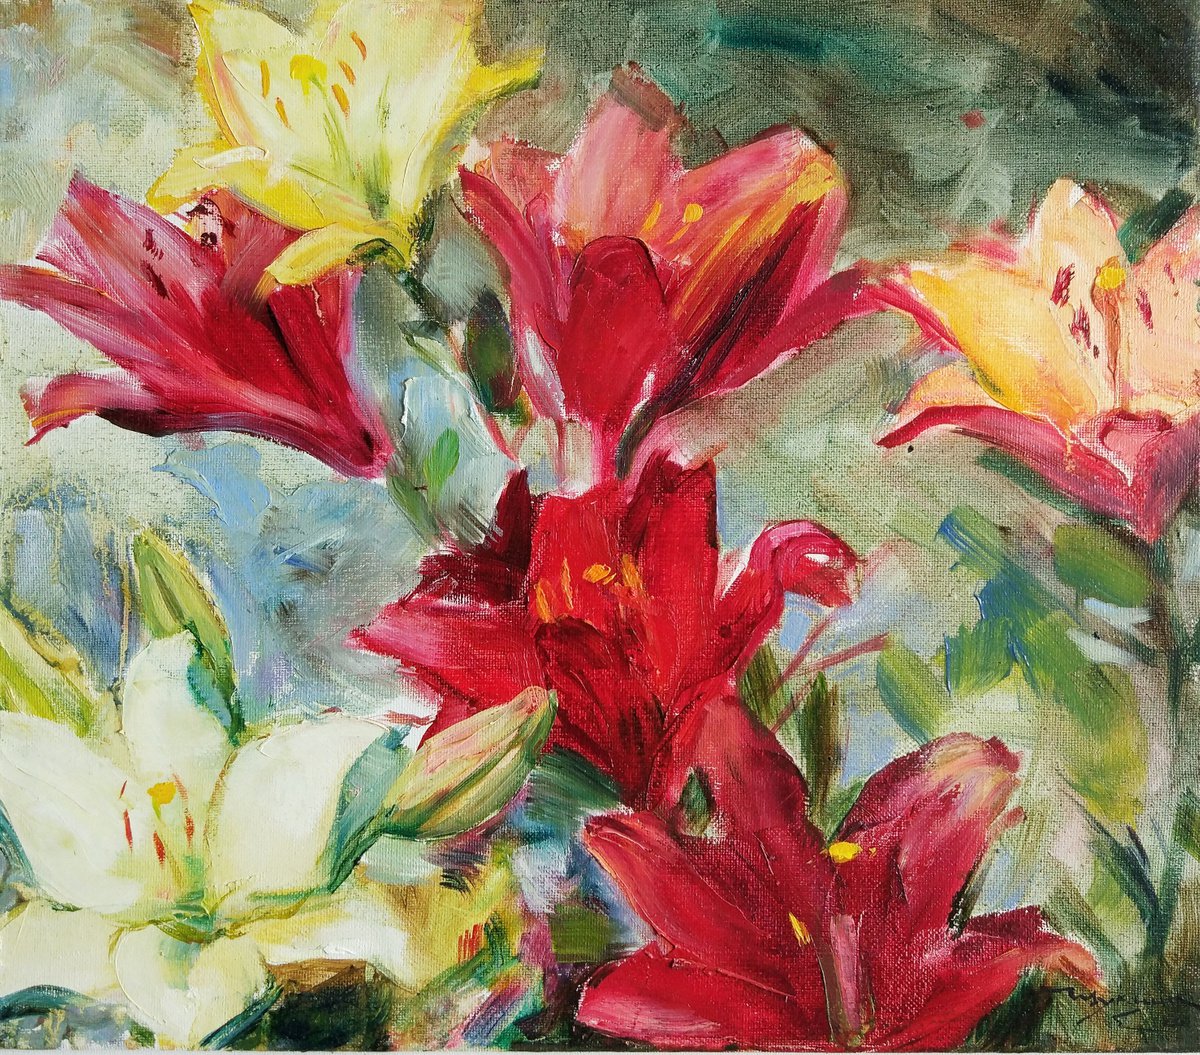 Lilies. Summer moments. Original plein air oil painting by Helen Shukina